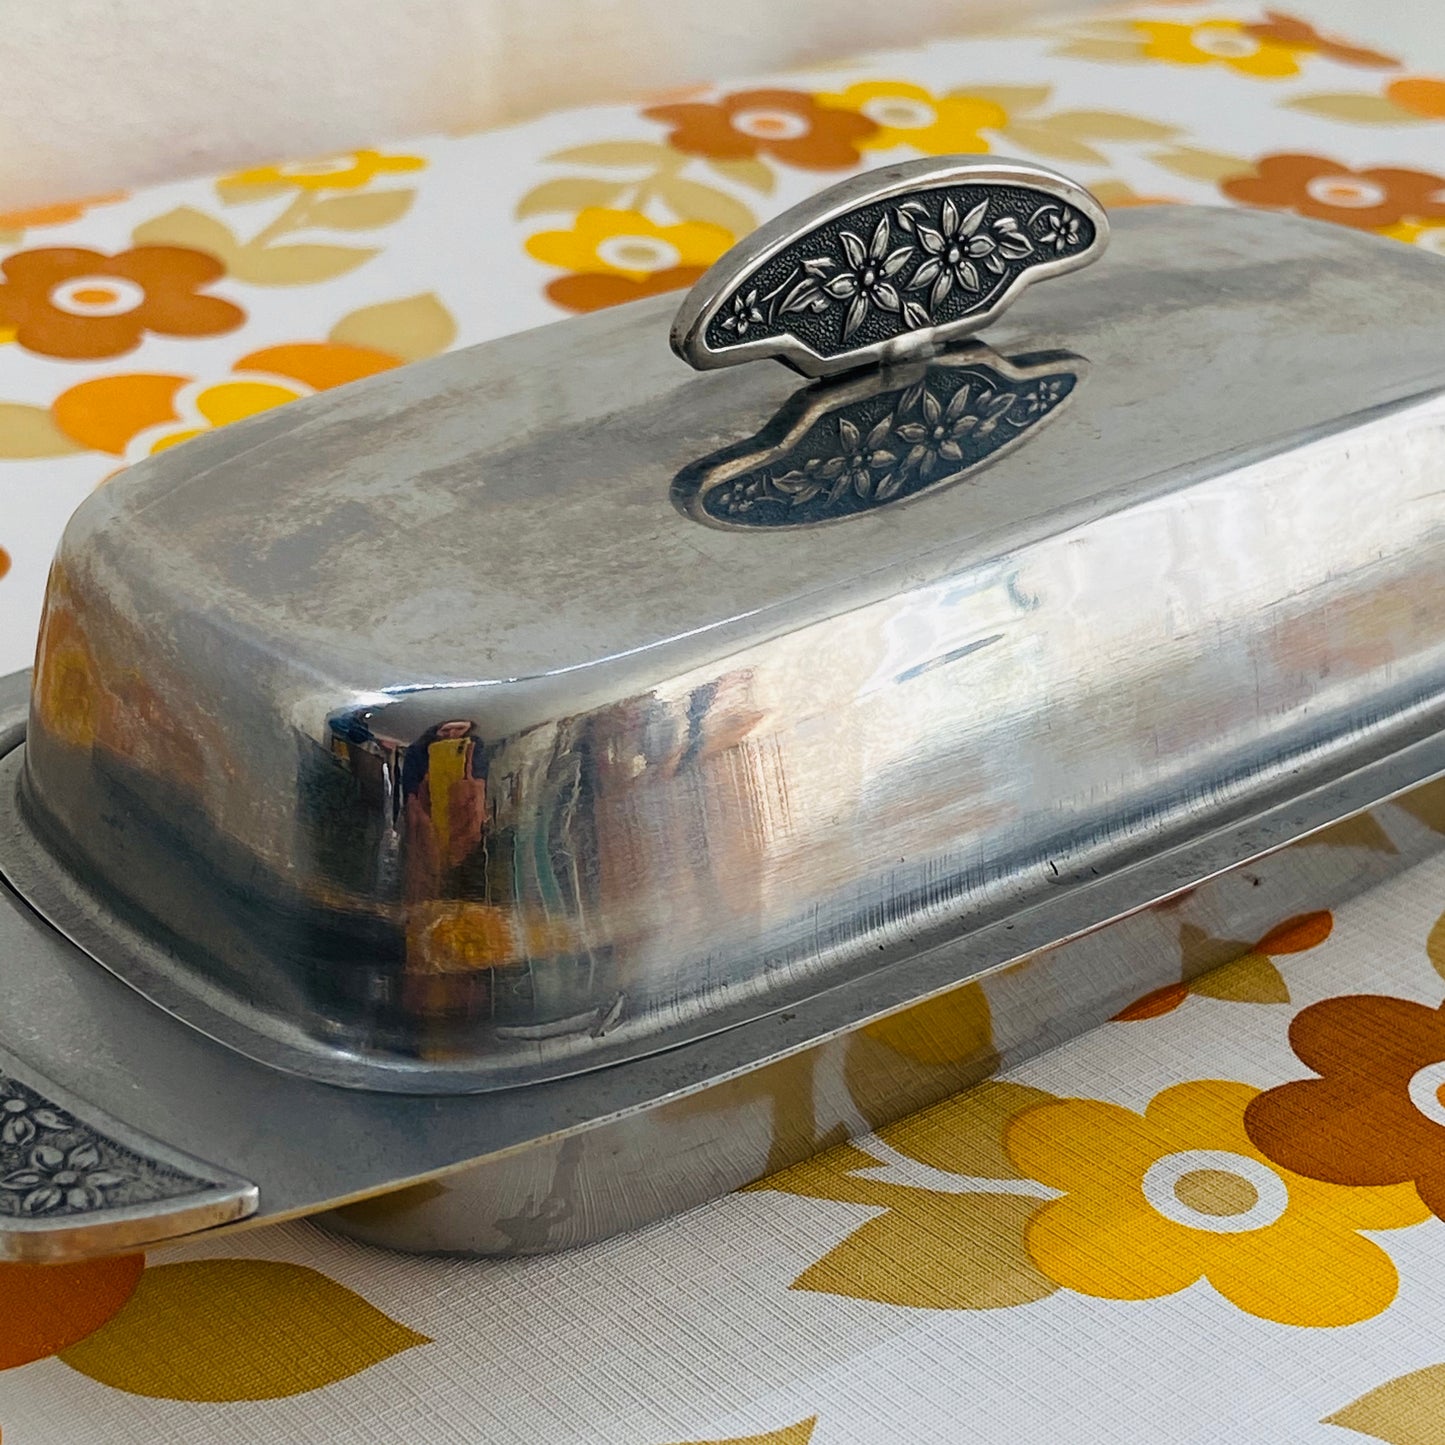 WILTSHIRE Vintage Stainless Steel Butter Dish Mid CENTURY